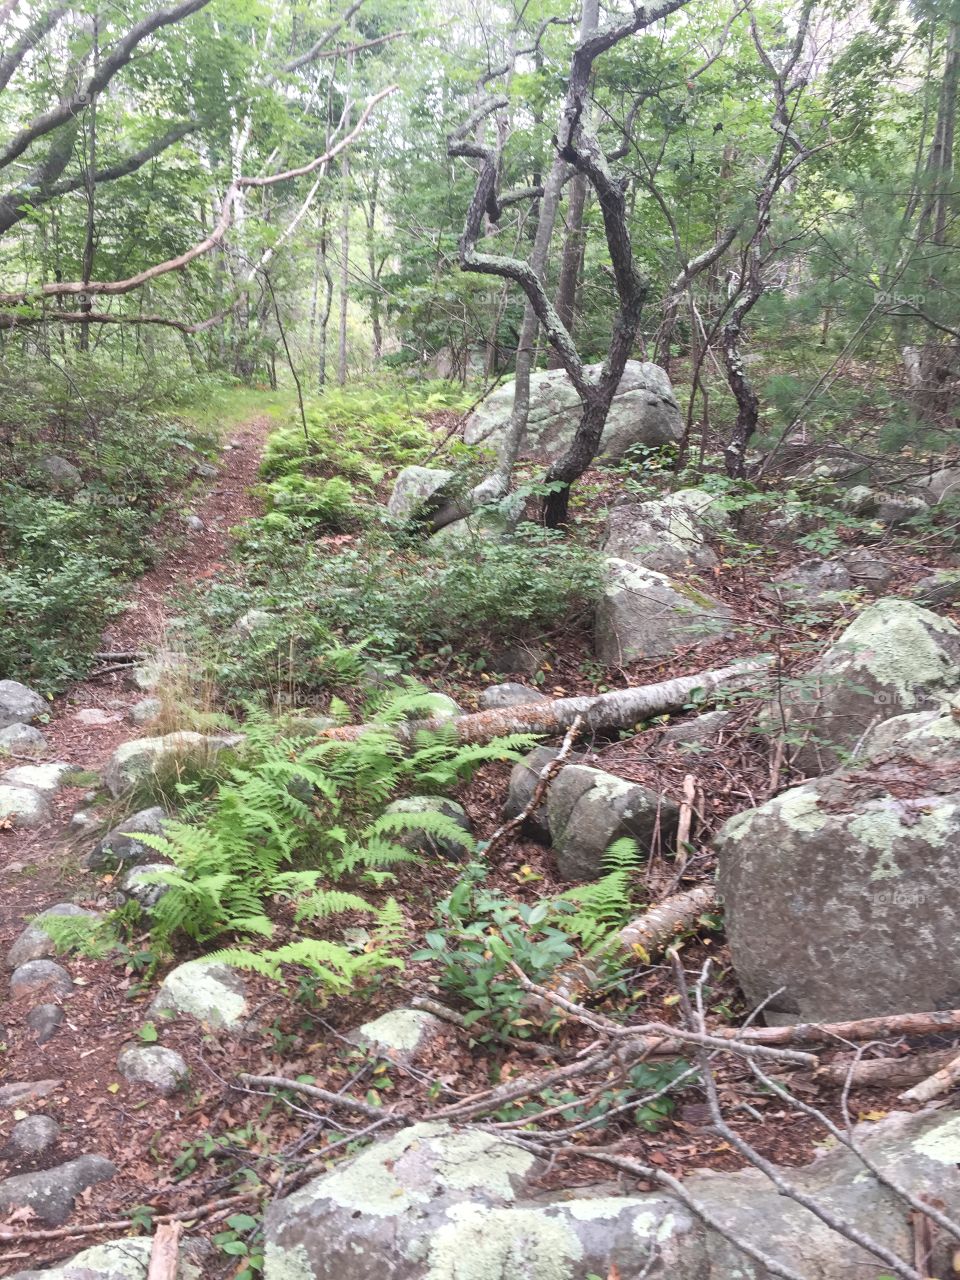 A rocky hiking trail in Gloucester, Massachusetts. Ferns grow by the path, which winds through the woods and between the lichen-covered trees.